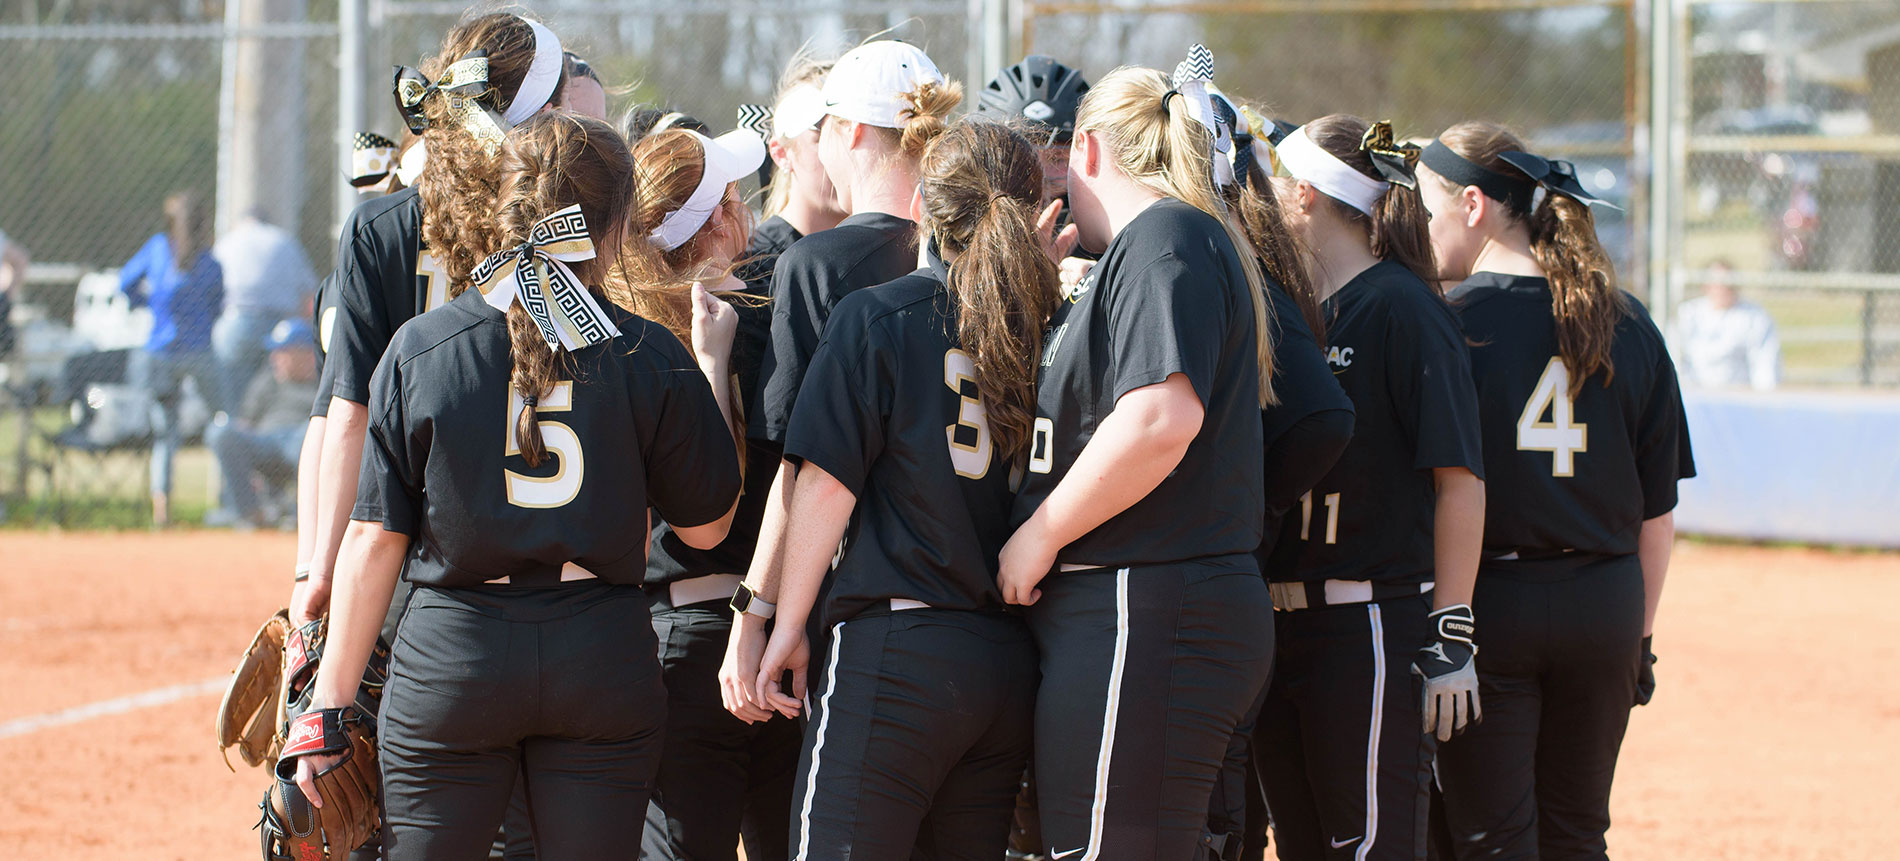 Anderson University Softball Camp Registration Is Now Open